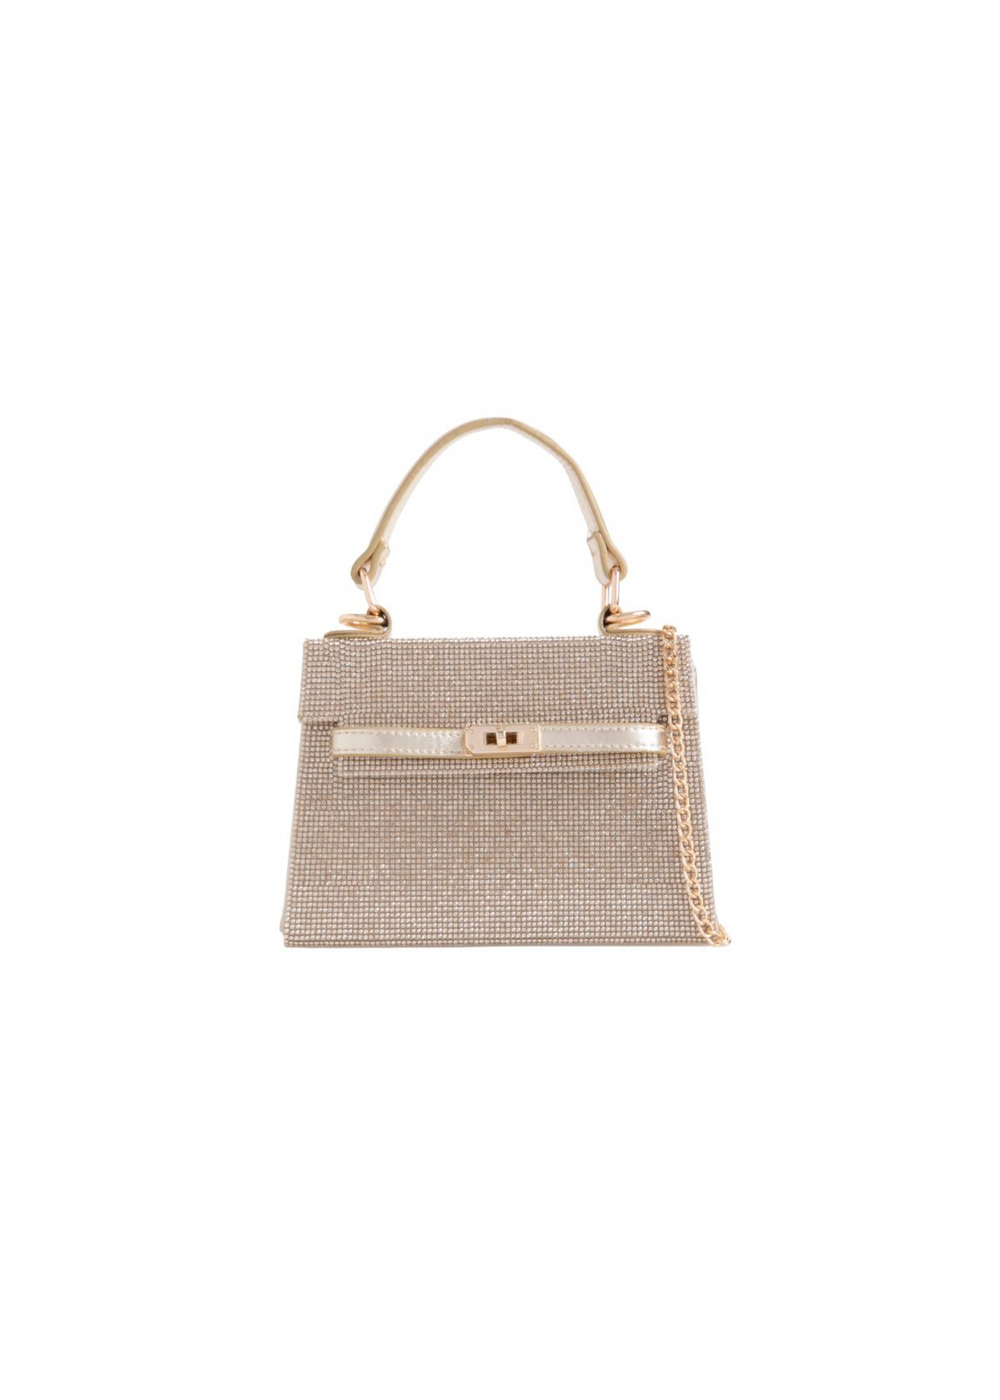 ACTION STYLISH SMALL BAG WITH BUCKLE AND CHAIN DETAIL IN GOLD